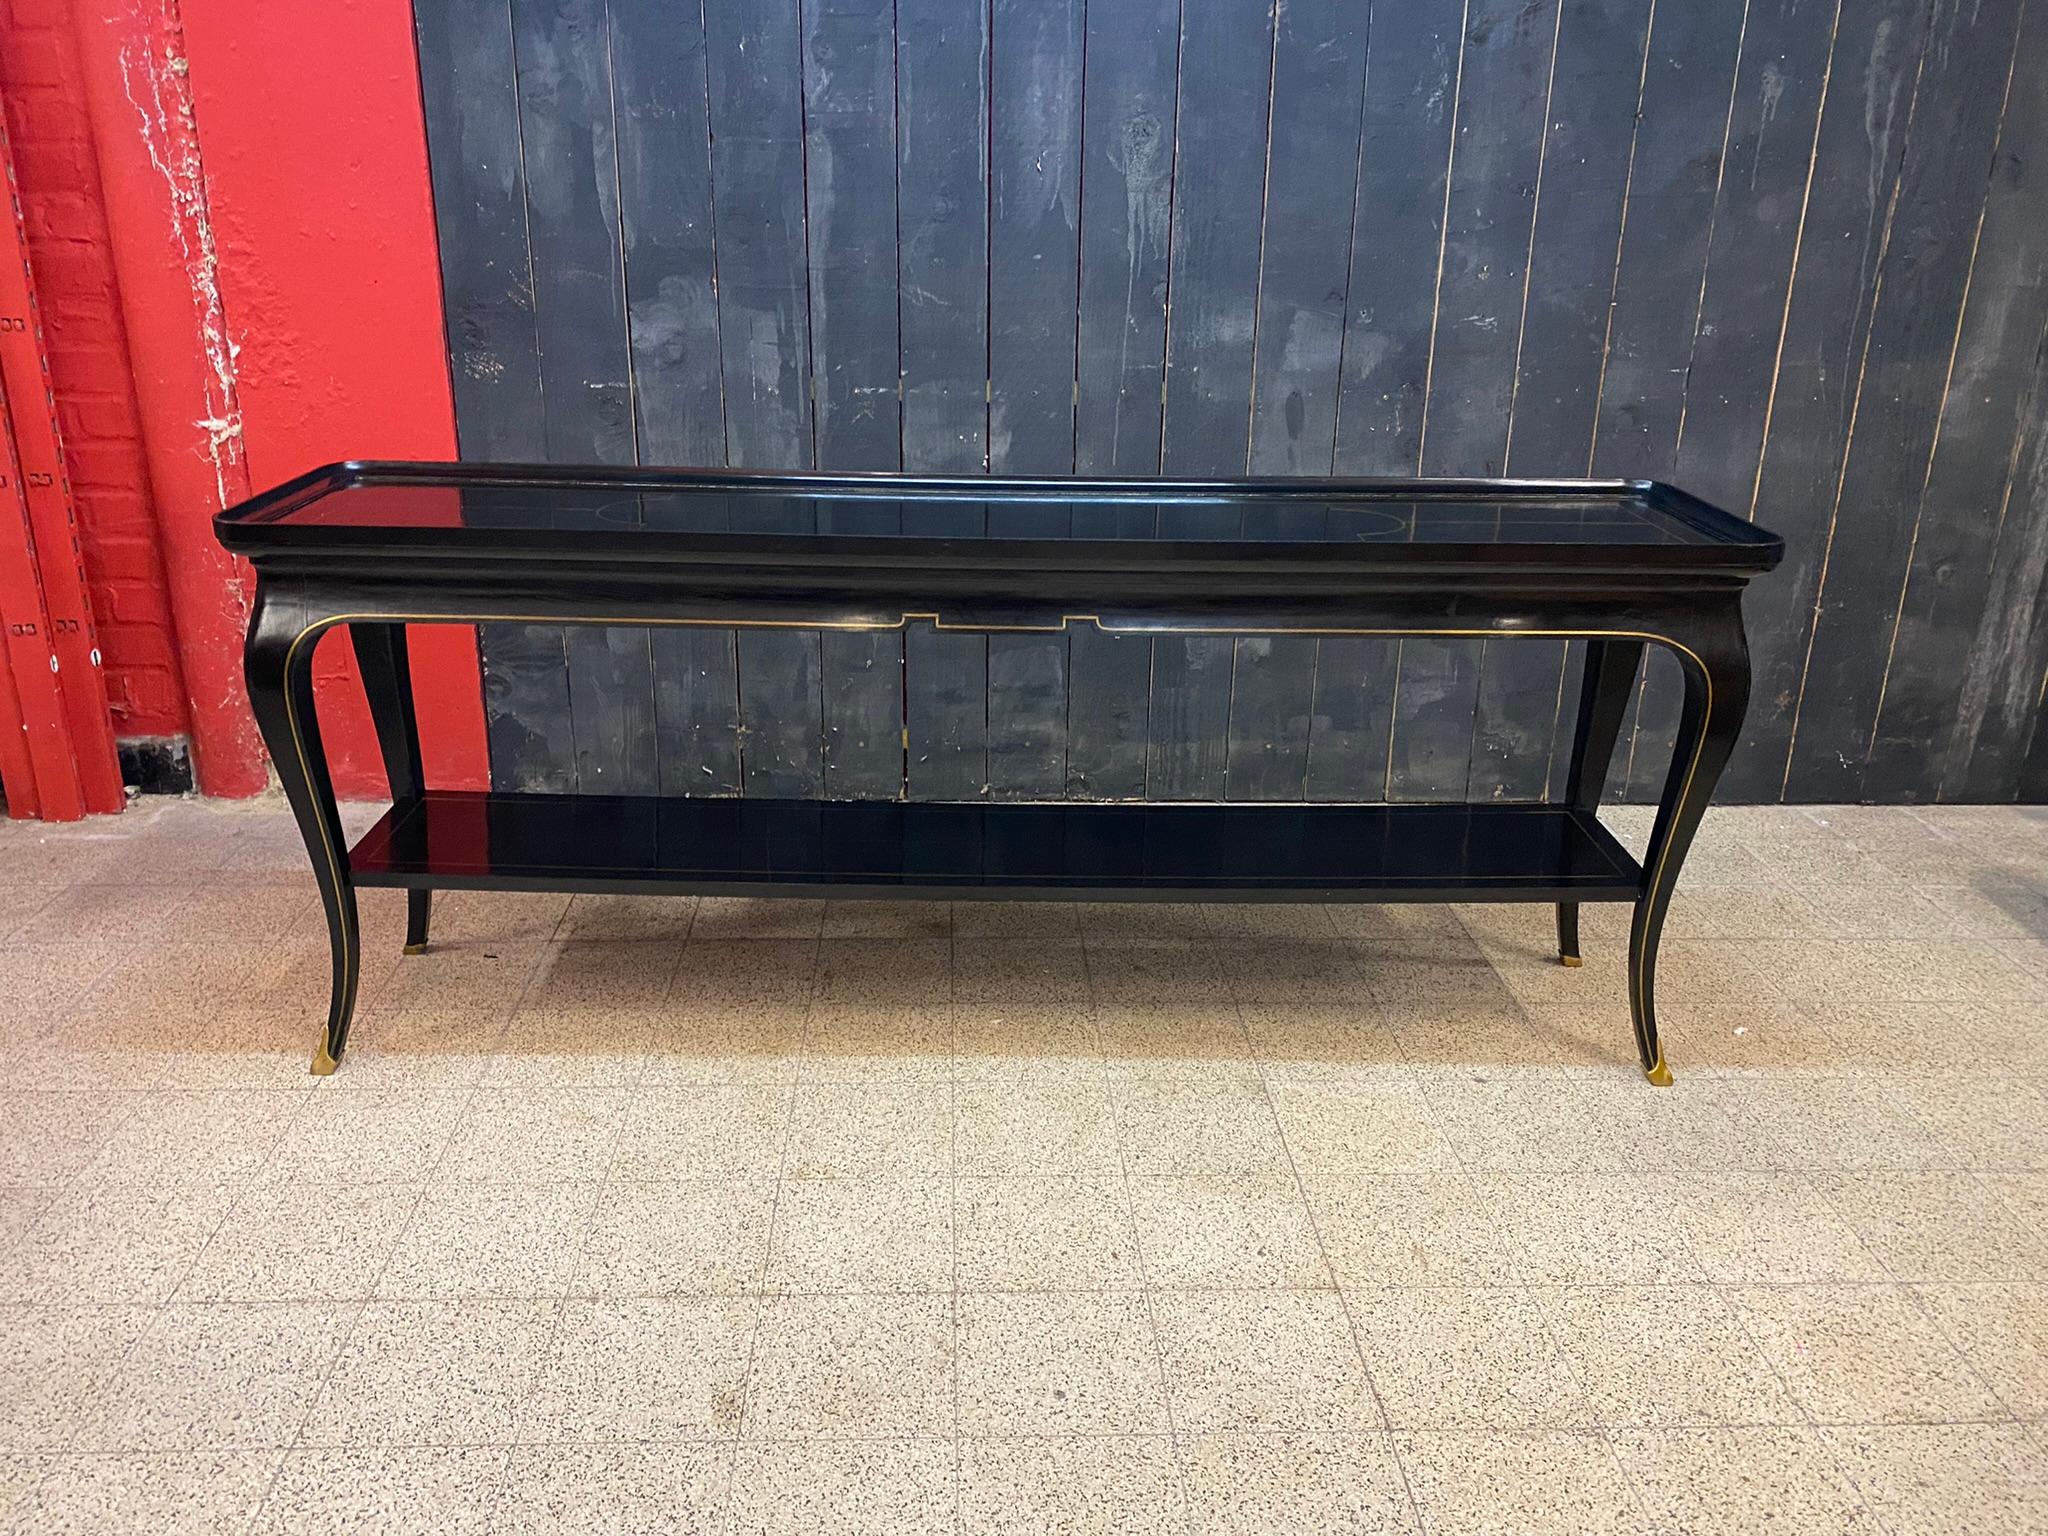 Maison Jansen, exceptional large neo classic console table in blackened pearwood and brass fillet circa 1950/1960
Another console of the same model, but larger is also offered for sale in another ad.
Prestigious provenance.